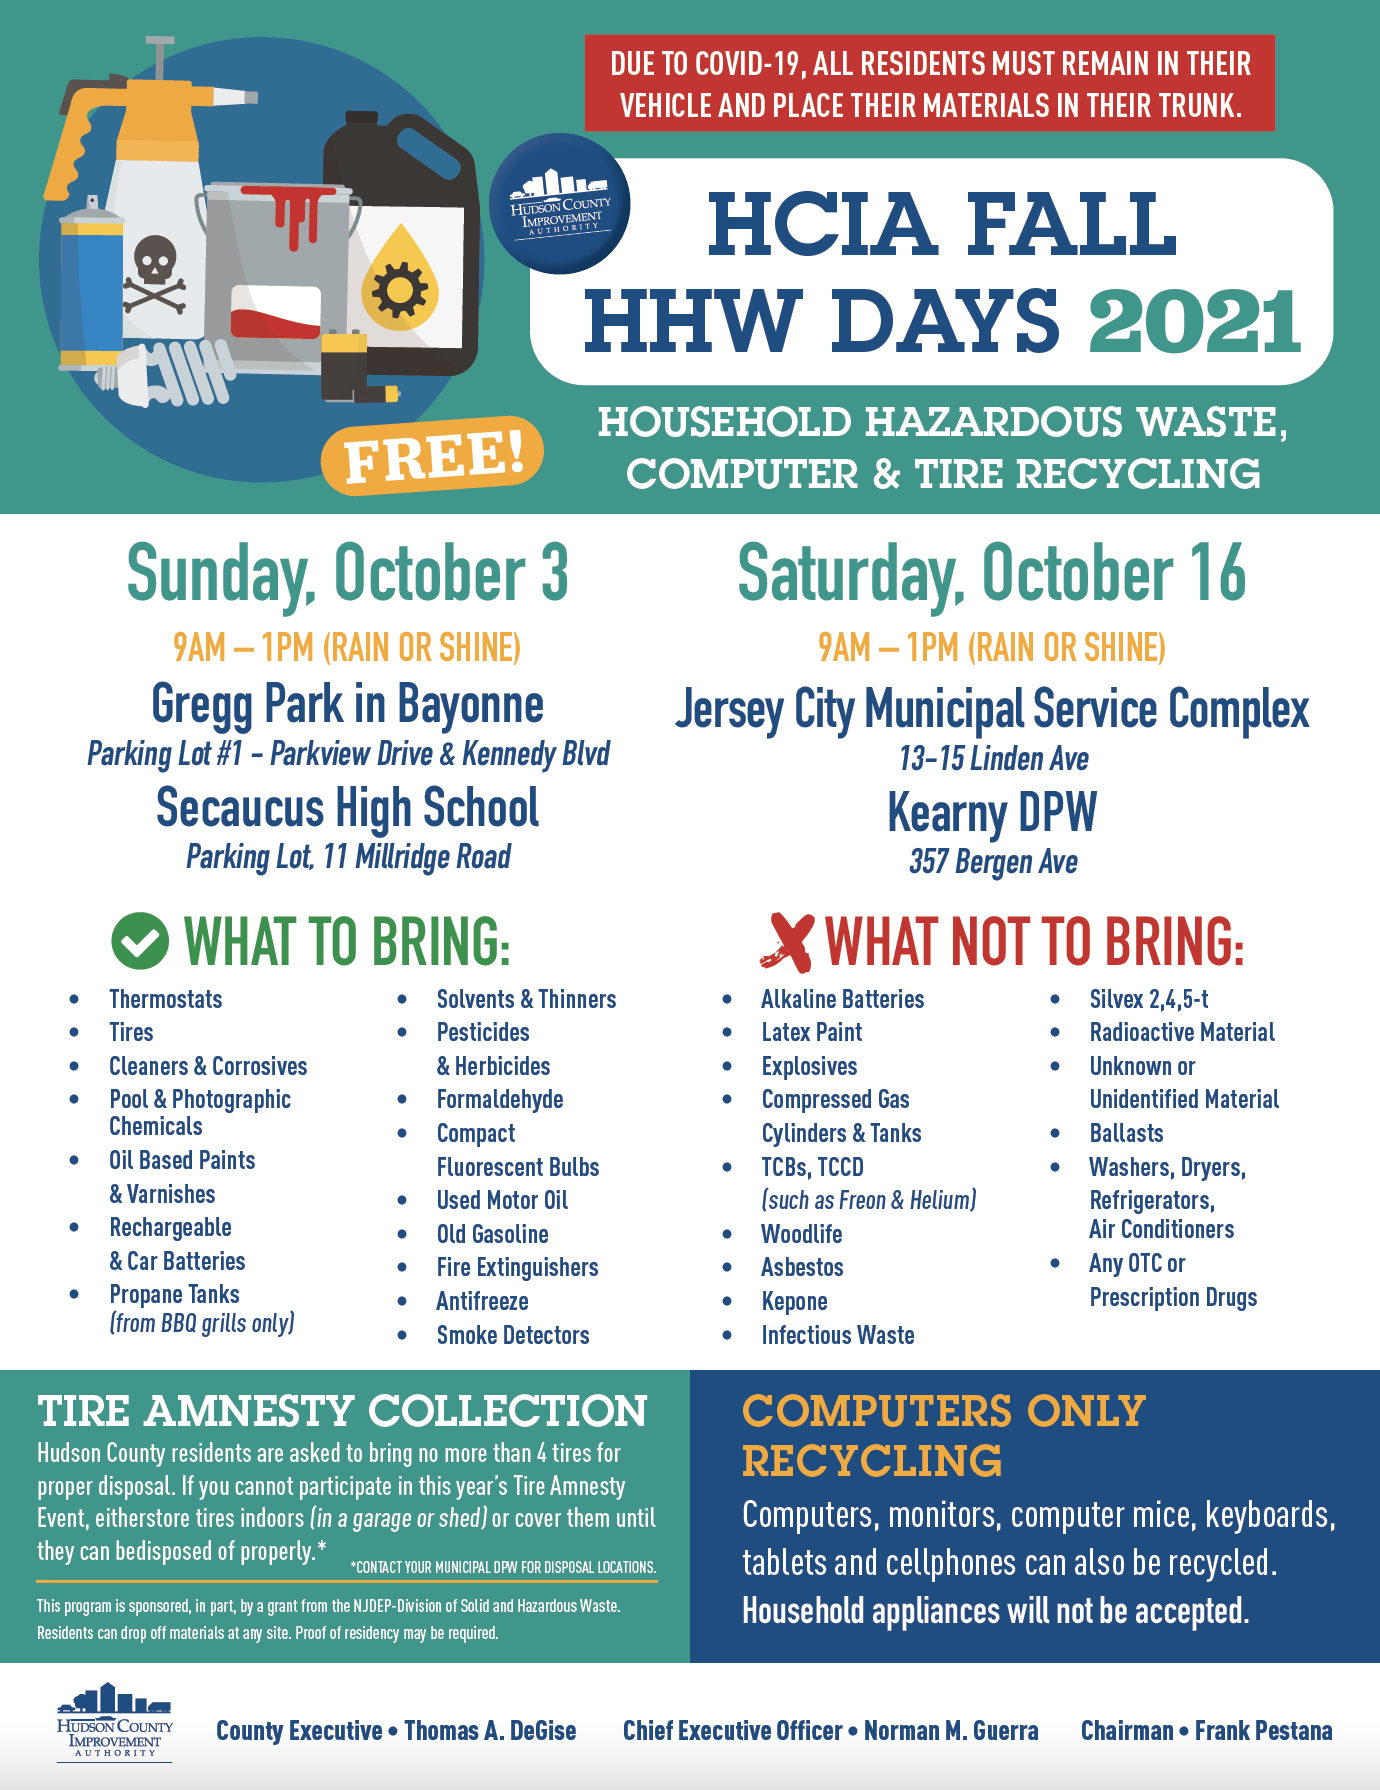 HAZARDOUS WASTE COMPUTER and TIRE RECYCLING Flyer